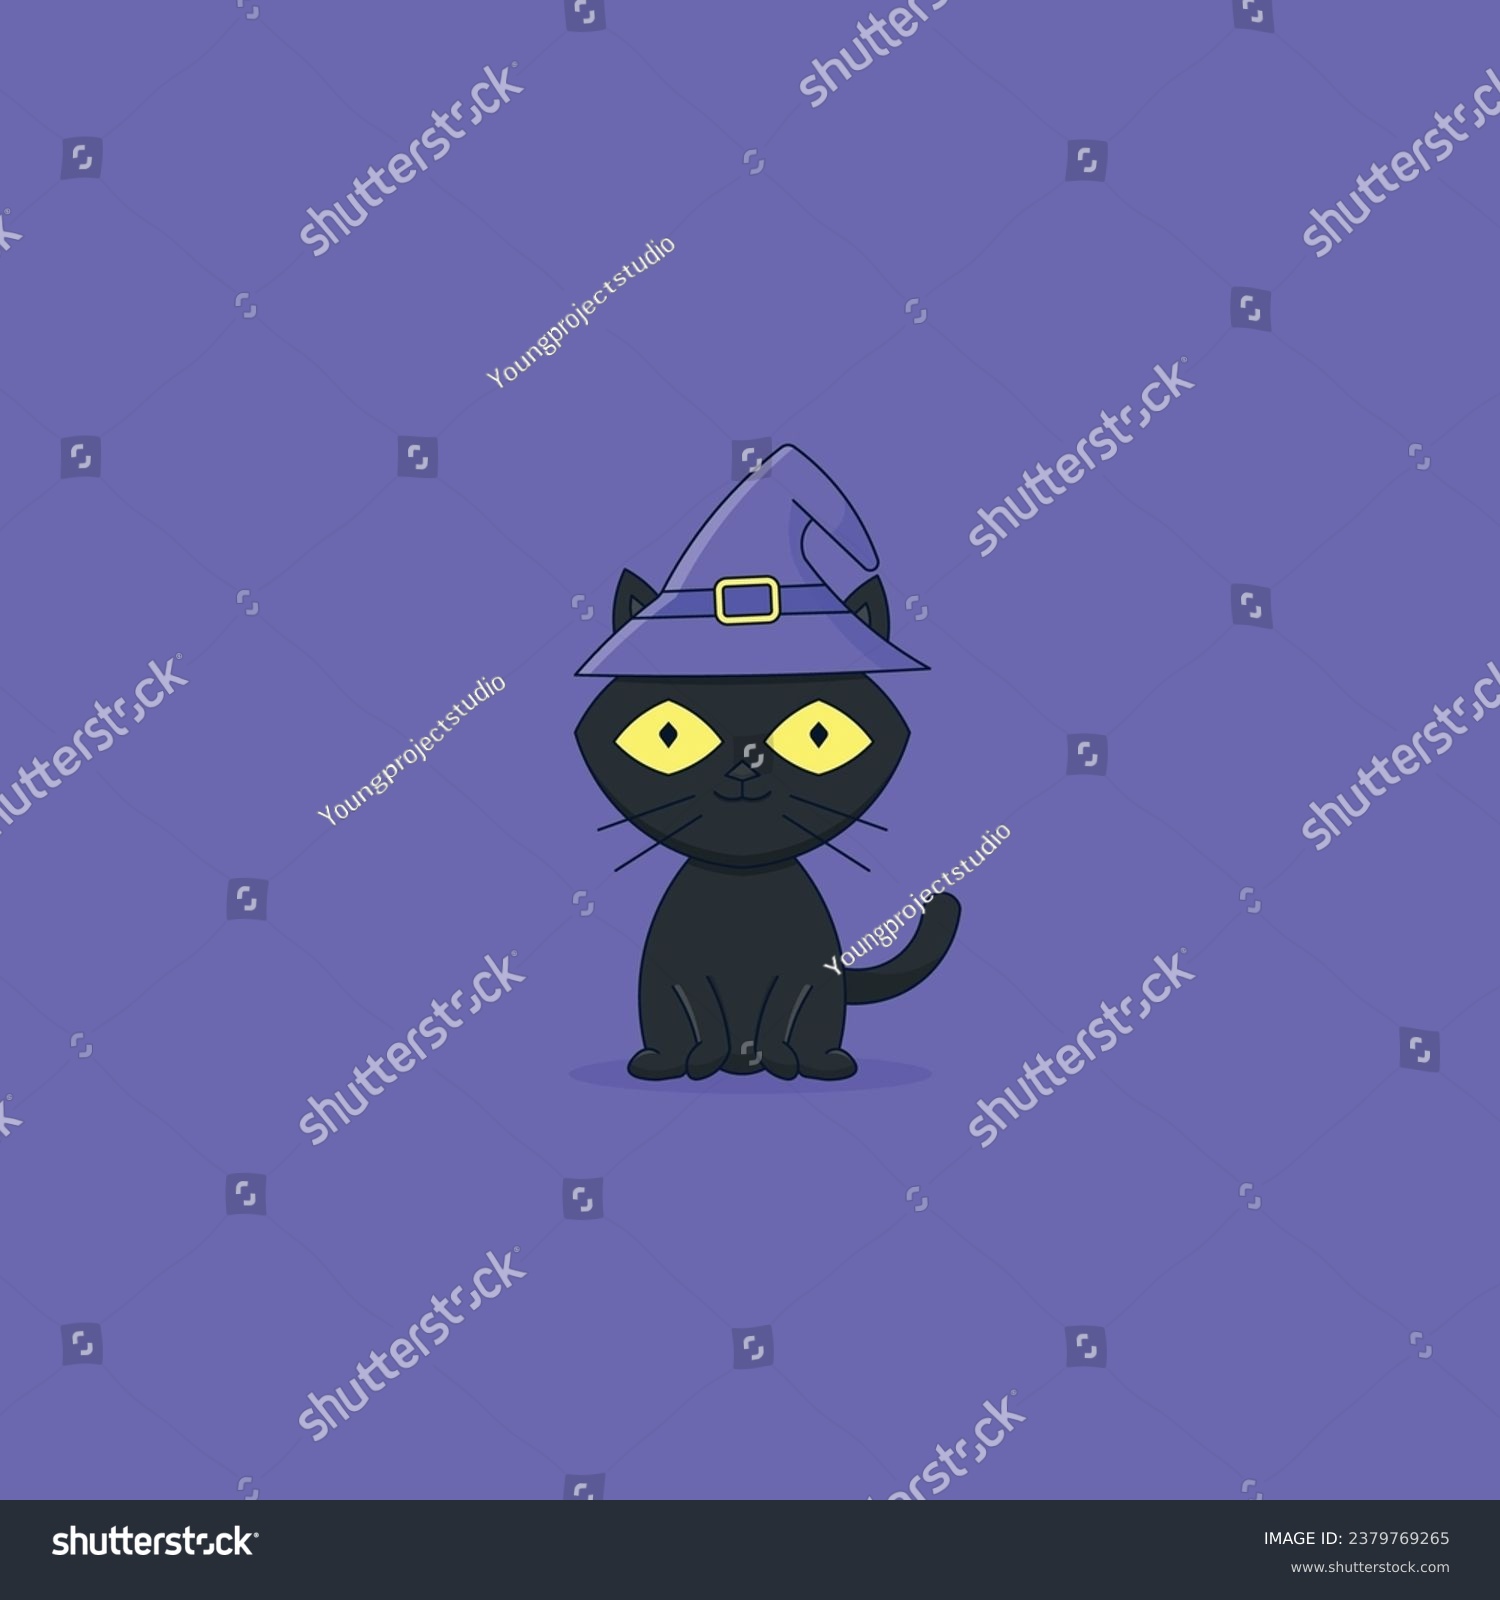 SVG of cat hallo ween character cute svg